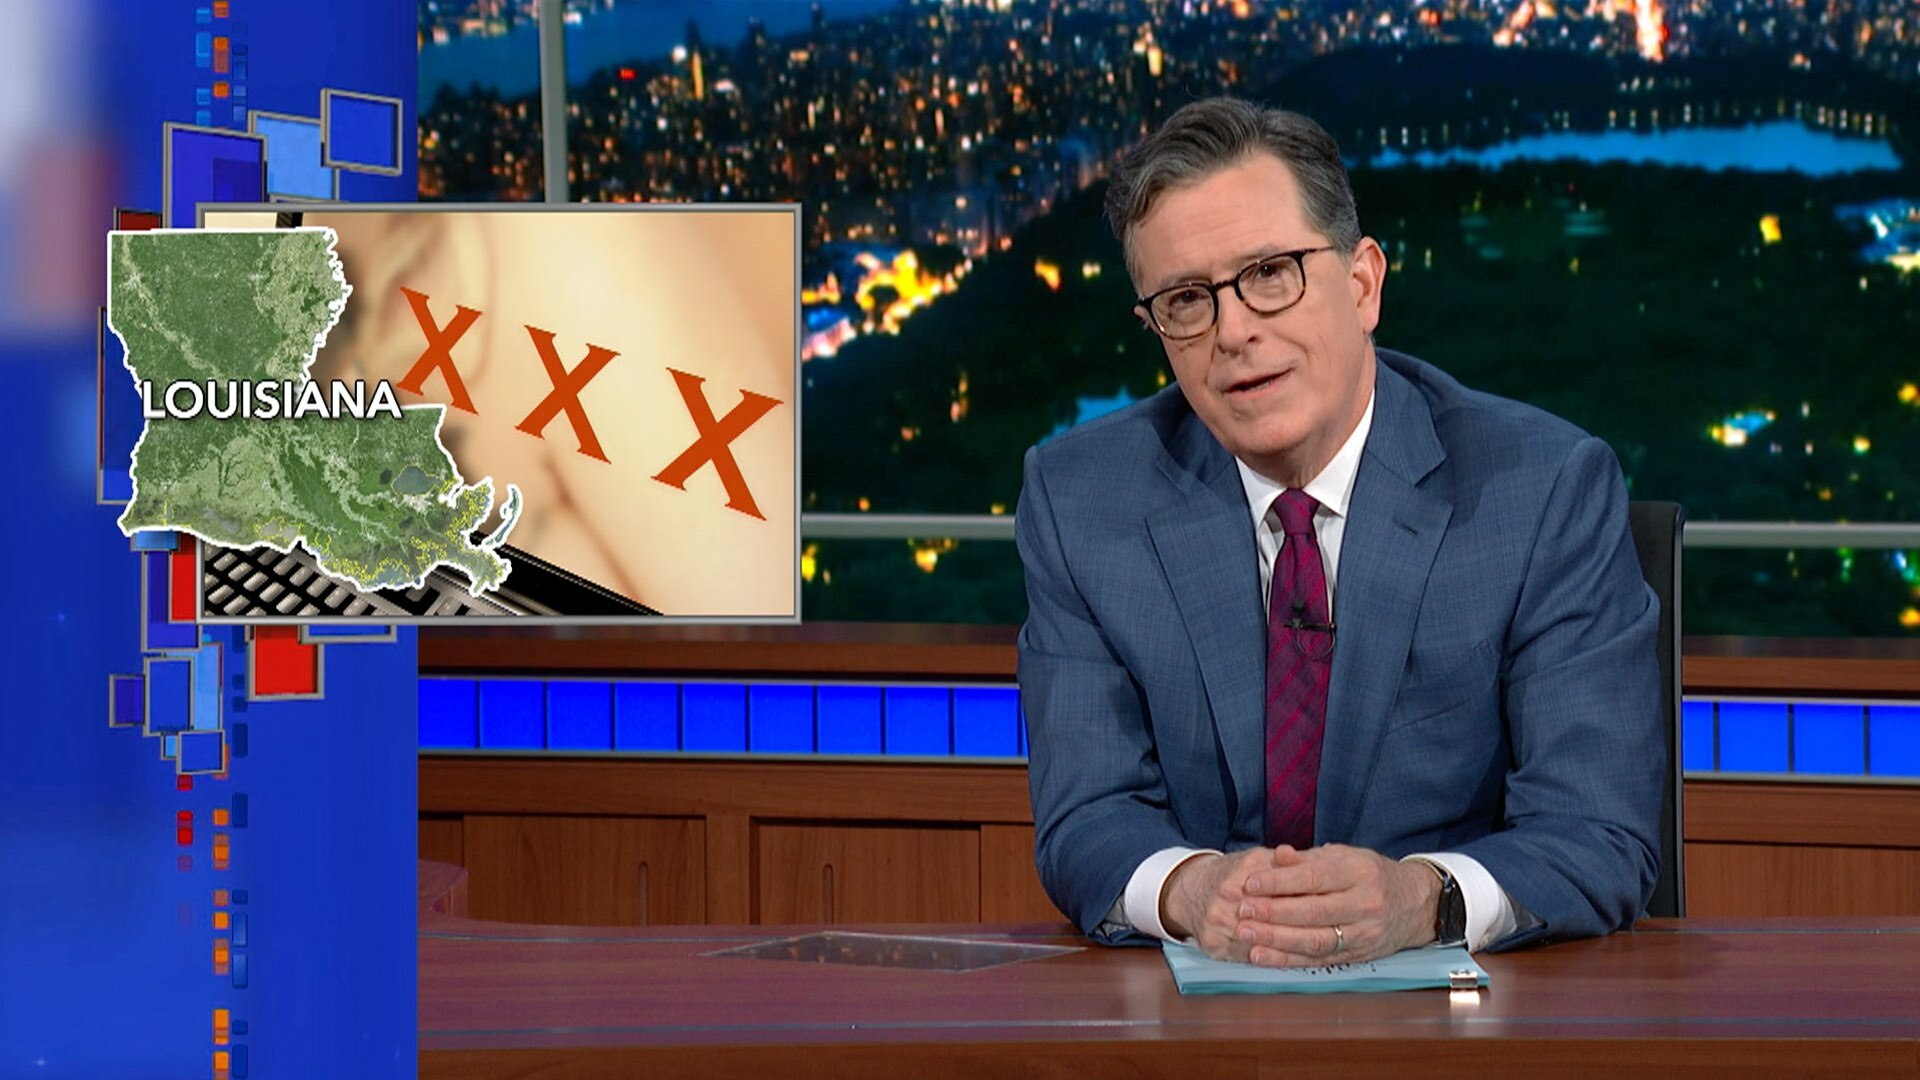 Watch The Late Show with Stephen Colbert: Meanwhile… Gov't ID Needed For Adult Websites LA | Pigeon Smuggles Meth Into Prison - show on CBS